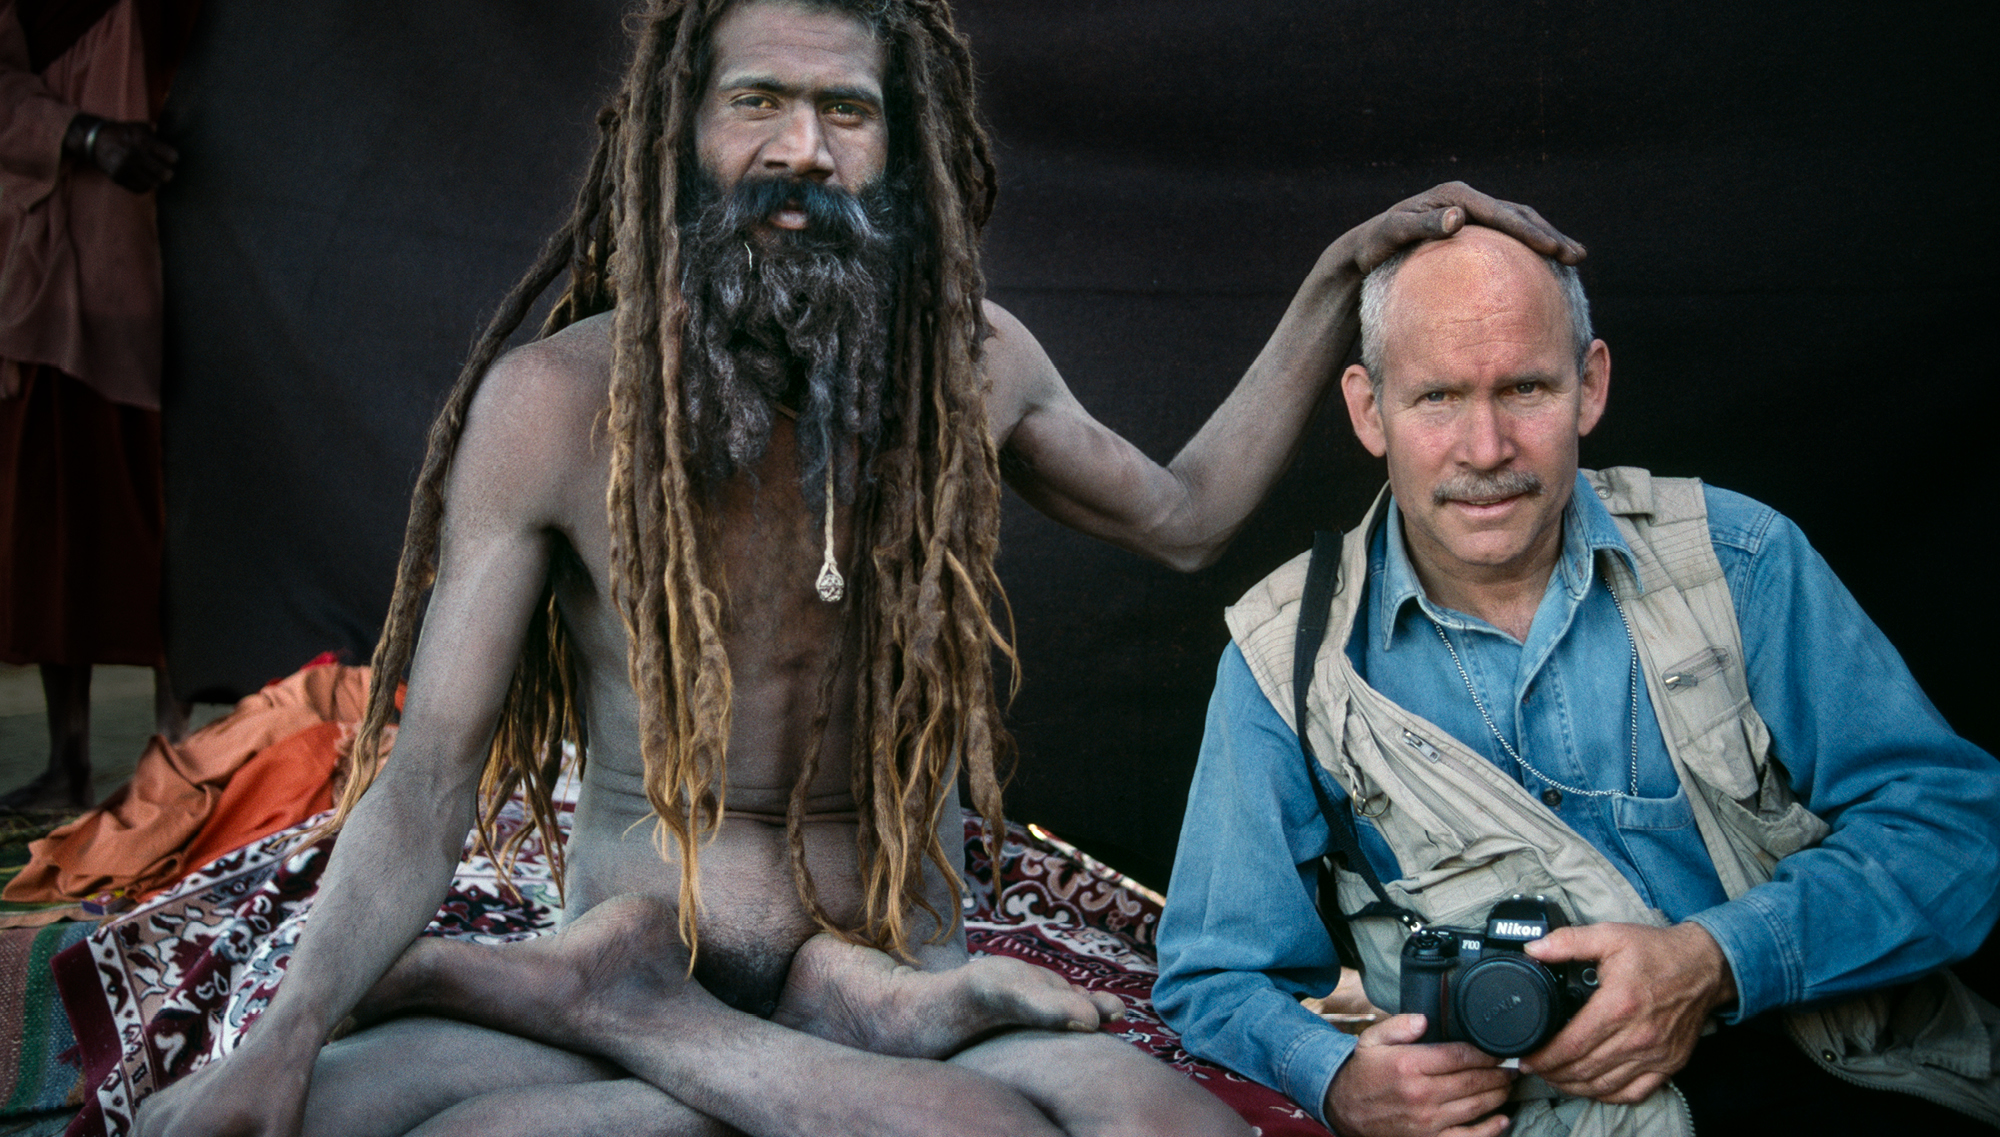 steve mccurry from these hands